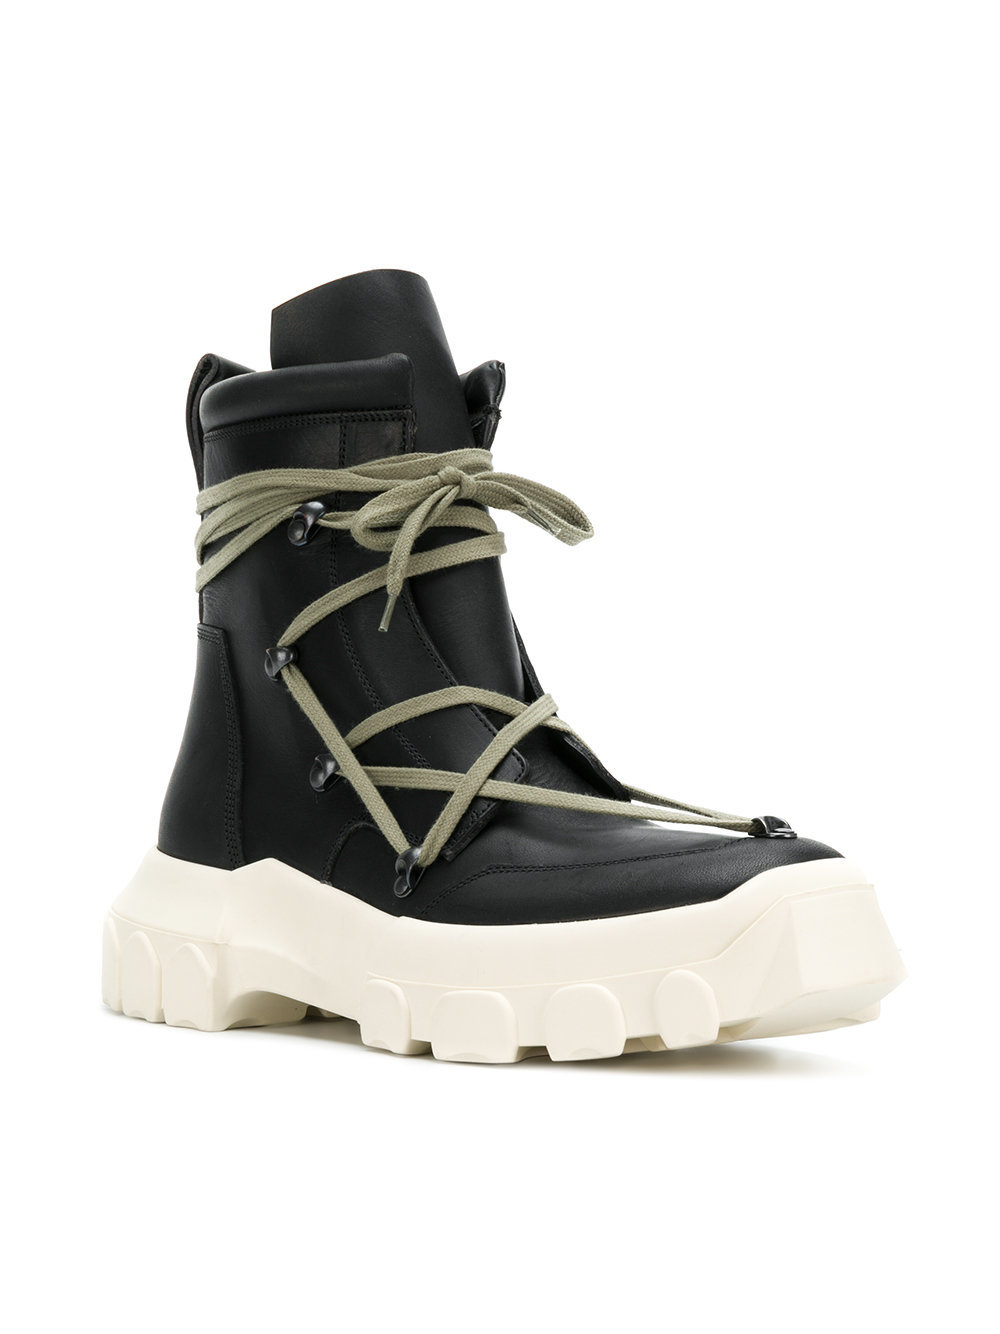 Rick Owens Hike Lace Up Boots, $1,329 | farfetch.com | Lookastic